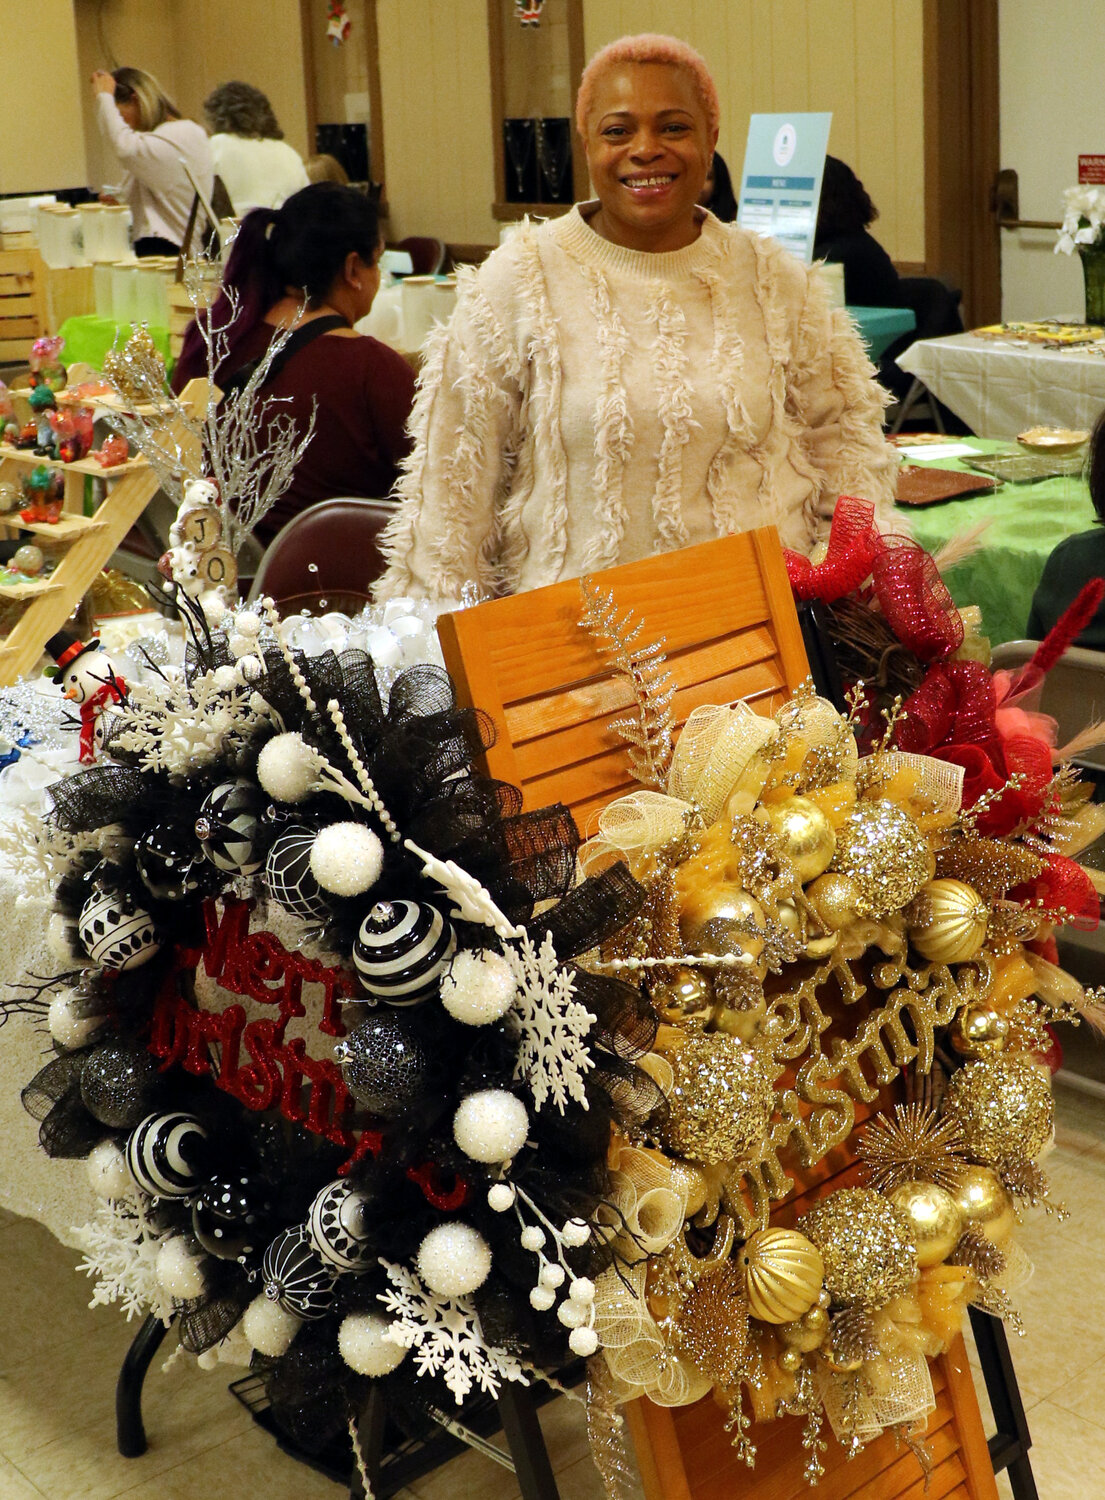 Joy Whilby of Joy's Art Room sold creative holiday crafts and wreaths to get people in the holiday spirit.